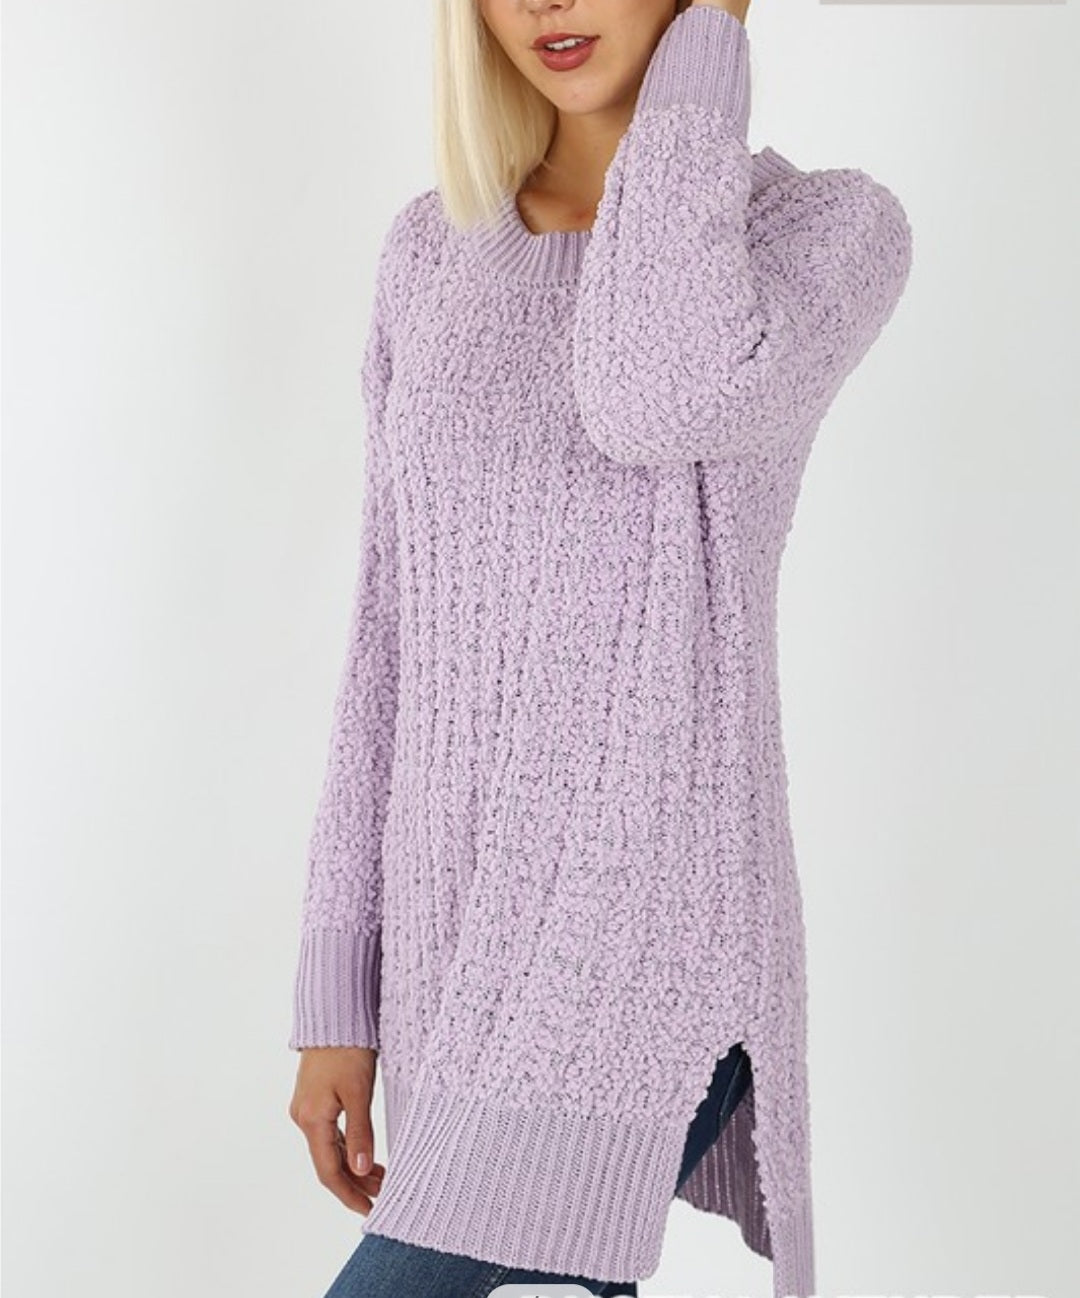 + Cable Popcorn Sweater